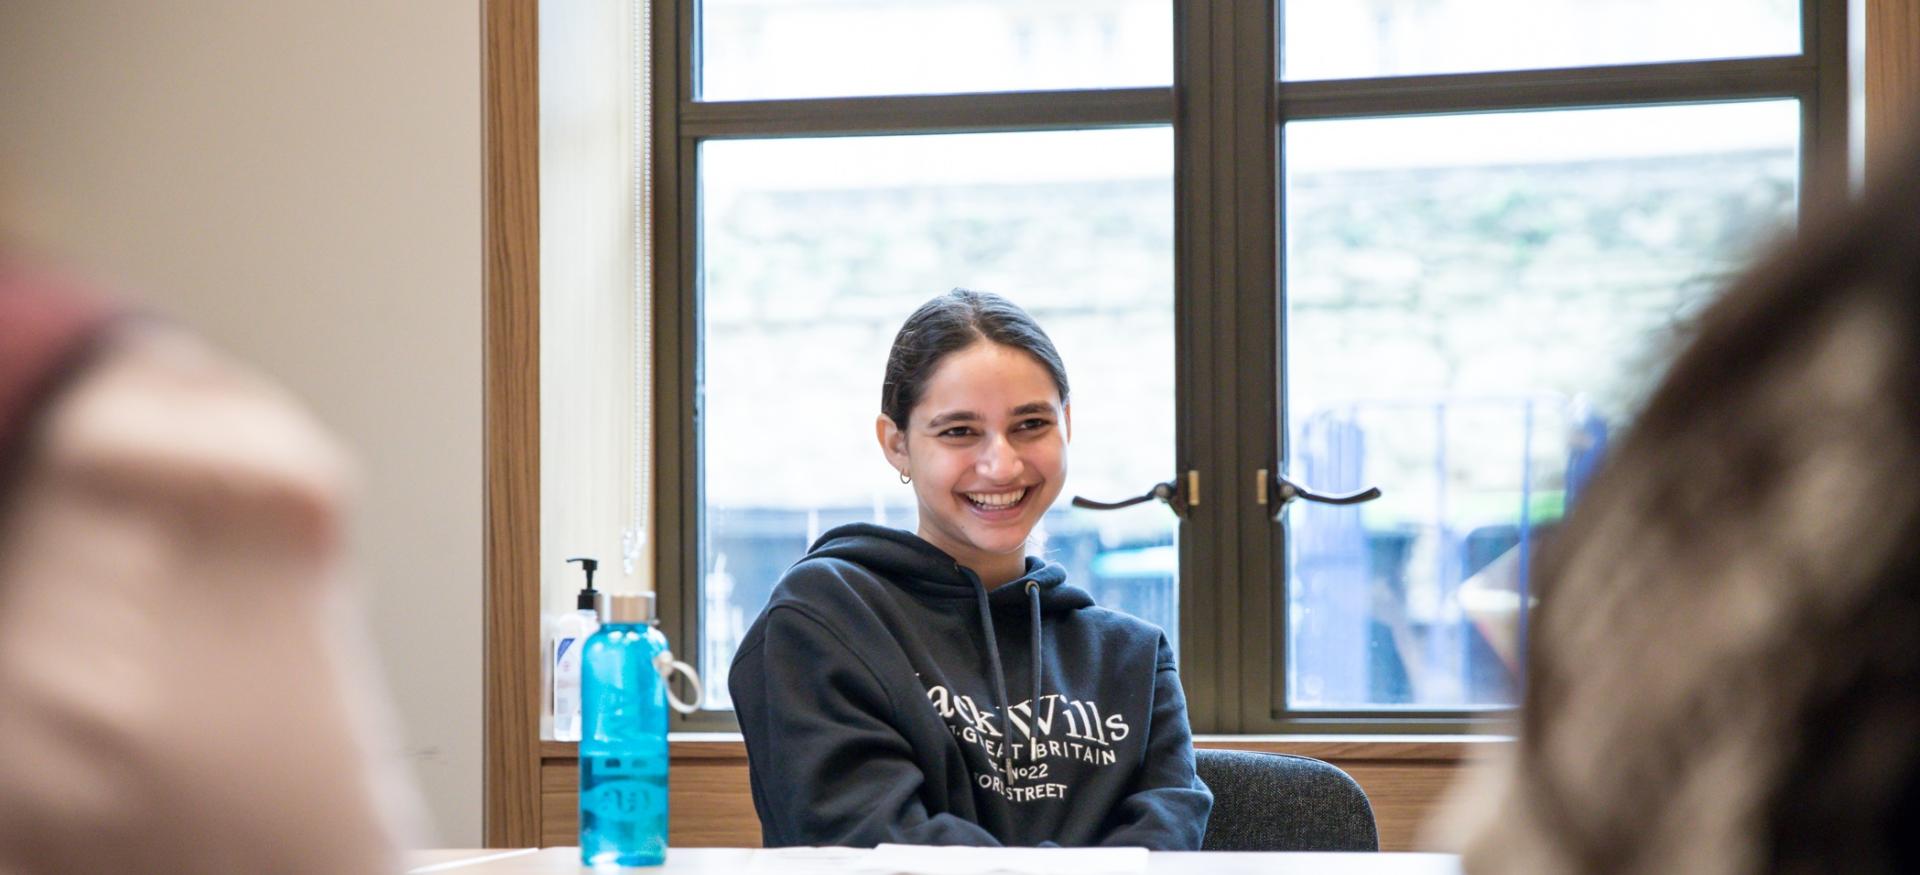 A student sits at a table during an academic discussion, smiling.